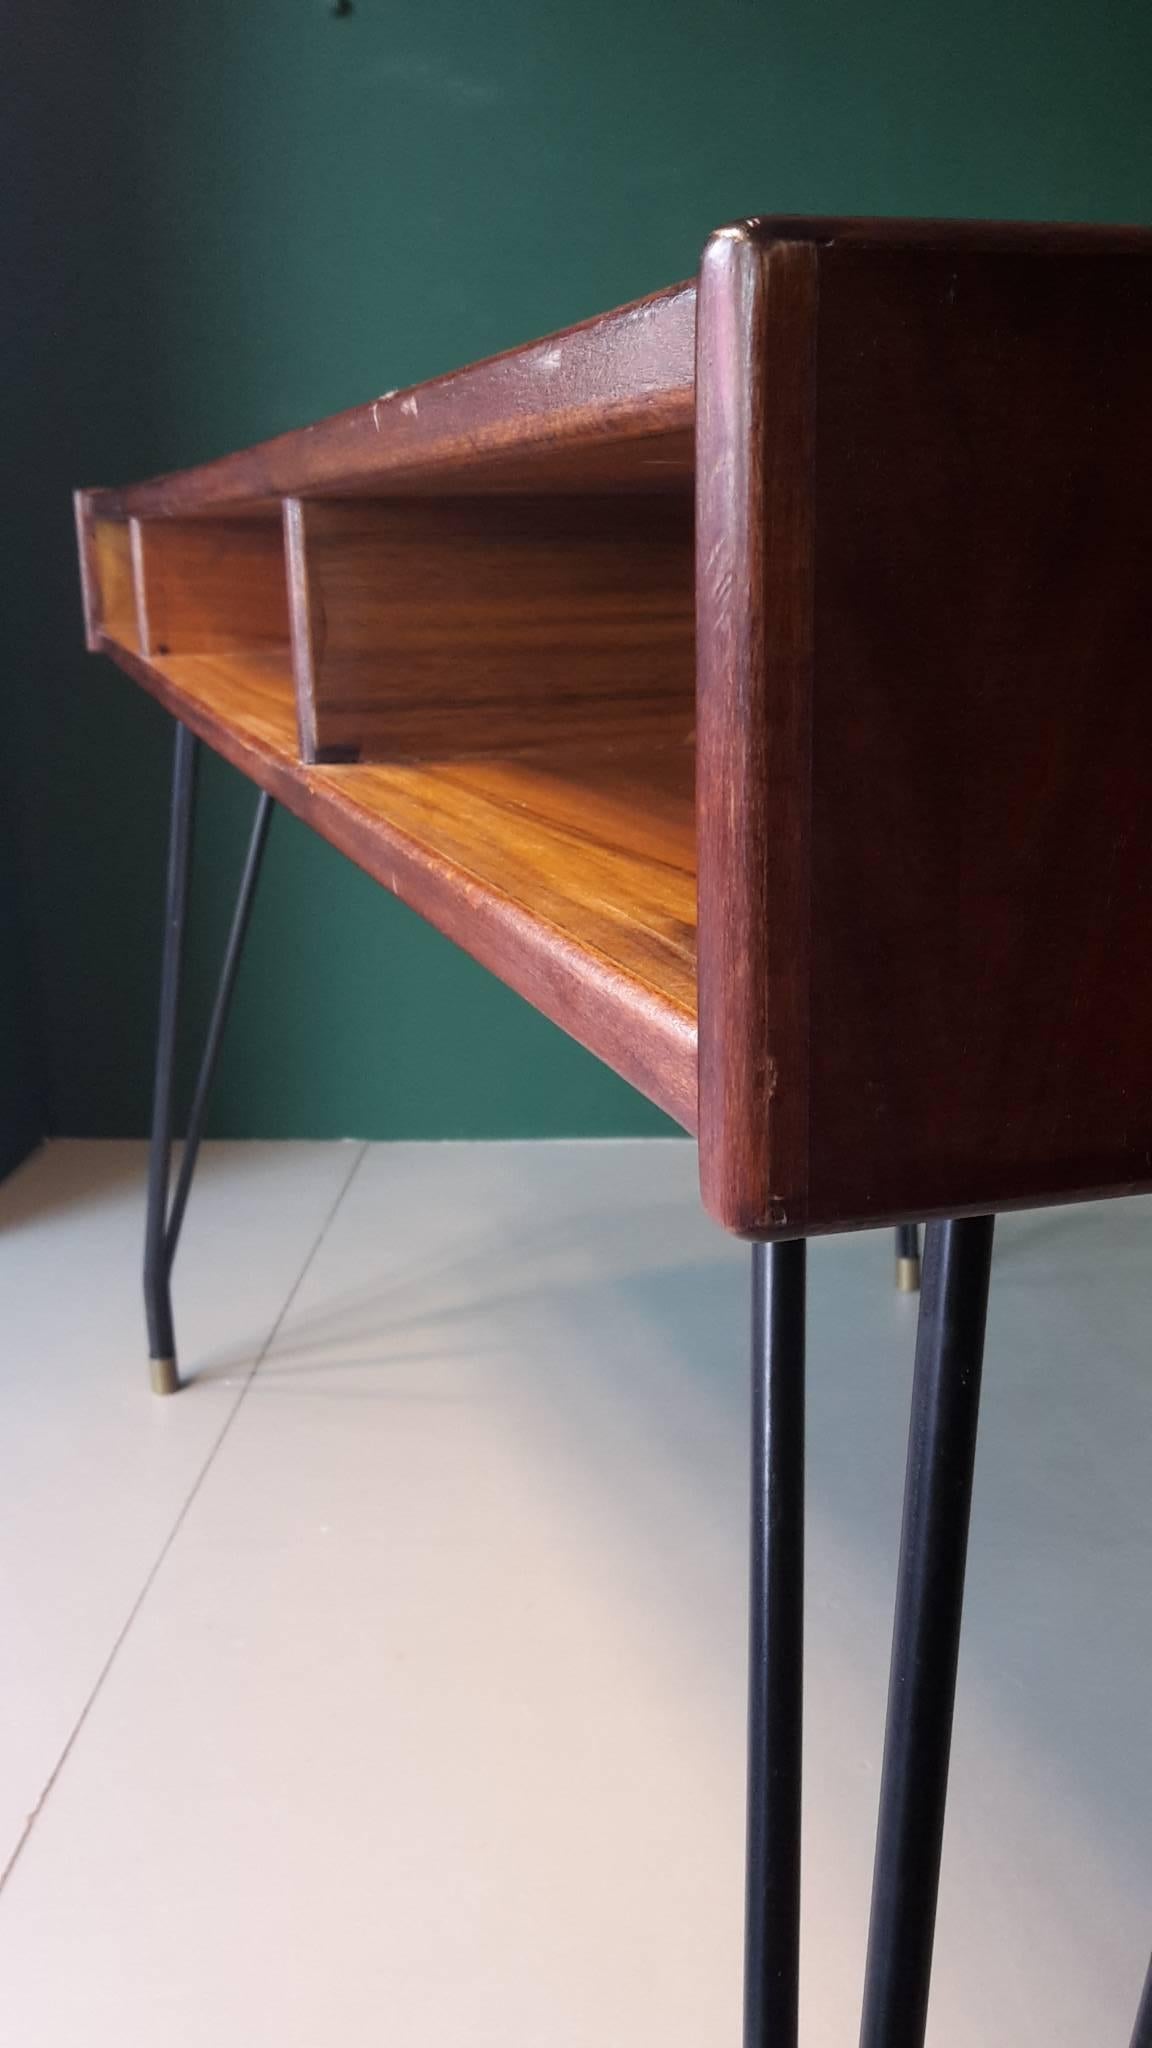 20th century Italian desk from the 1960s made of teak, metal and brass.